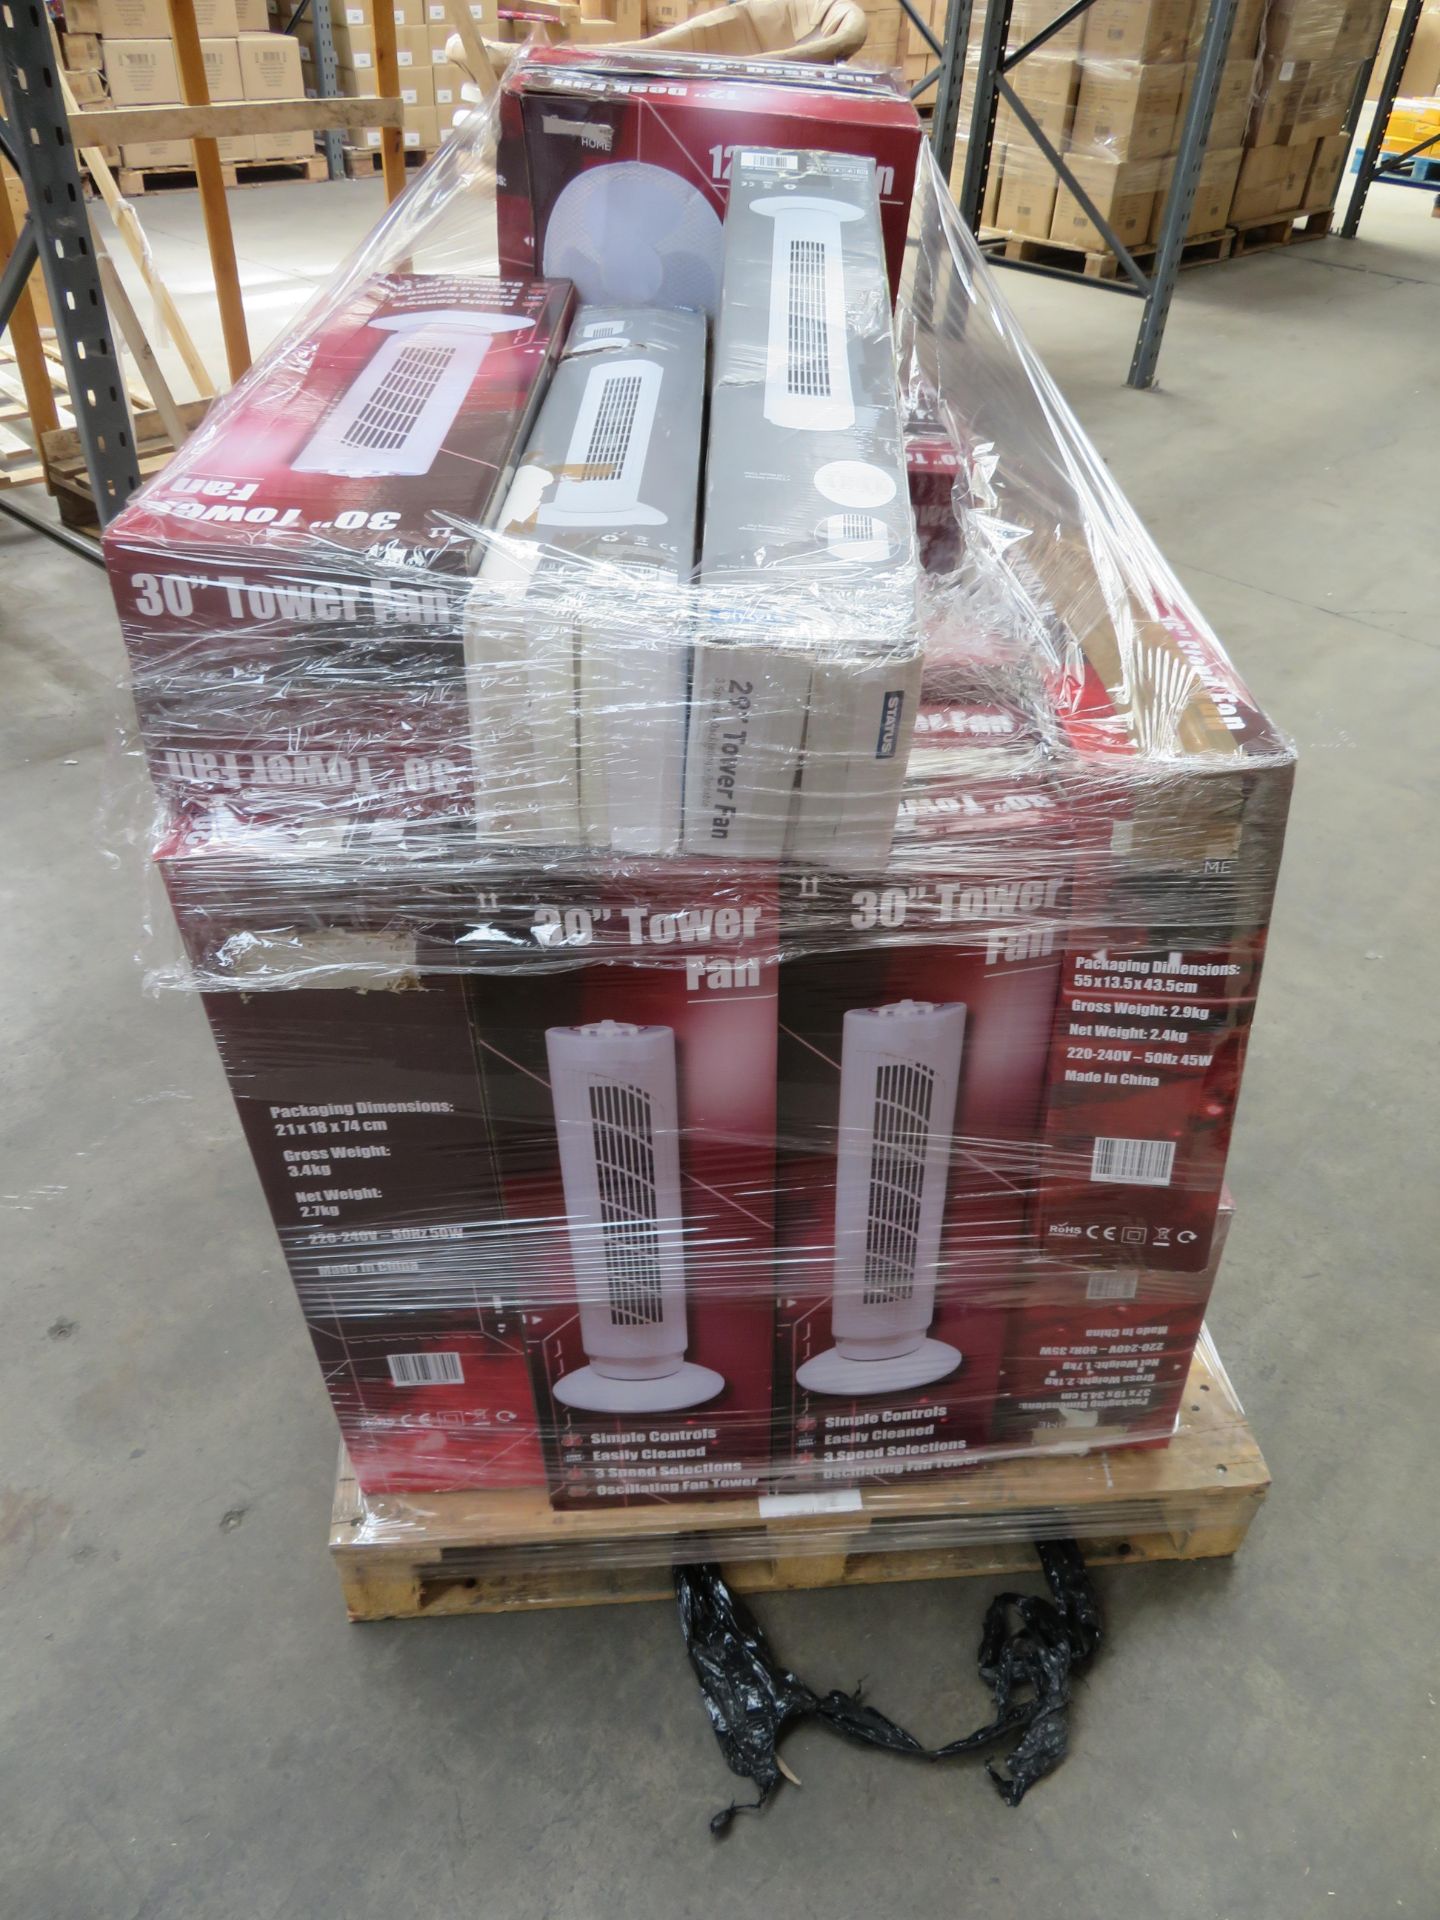 (R101) PALLET TO CONTAIN 23 VARIOUS FANS - INCLUDING 30 INCH TOWER FANS, 29 INCH TOWER FANS, 16 INCH - Image 3 of 3